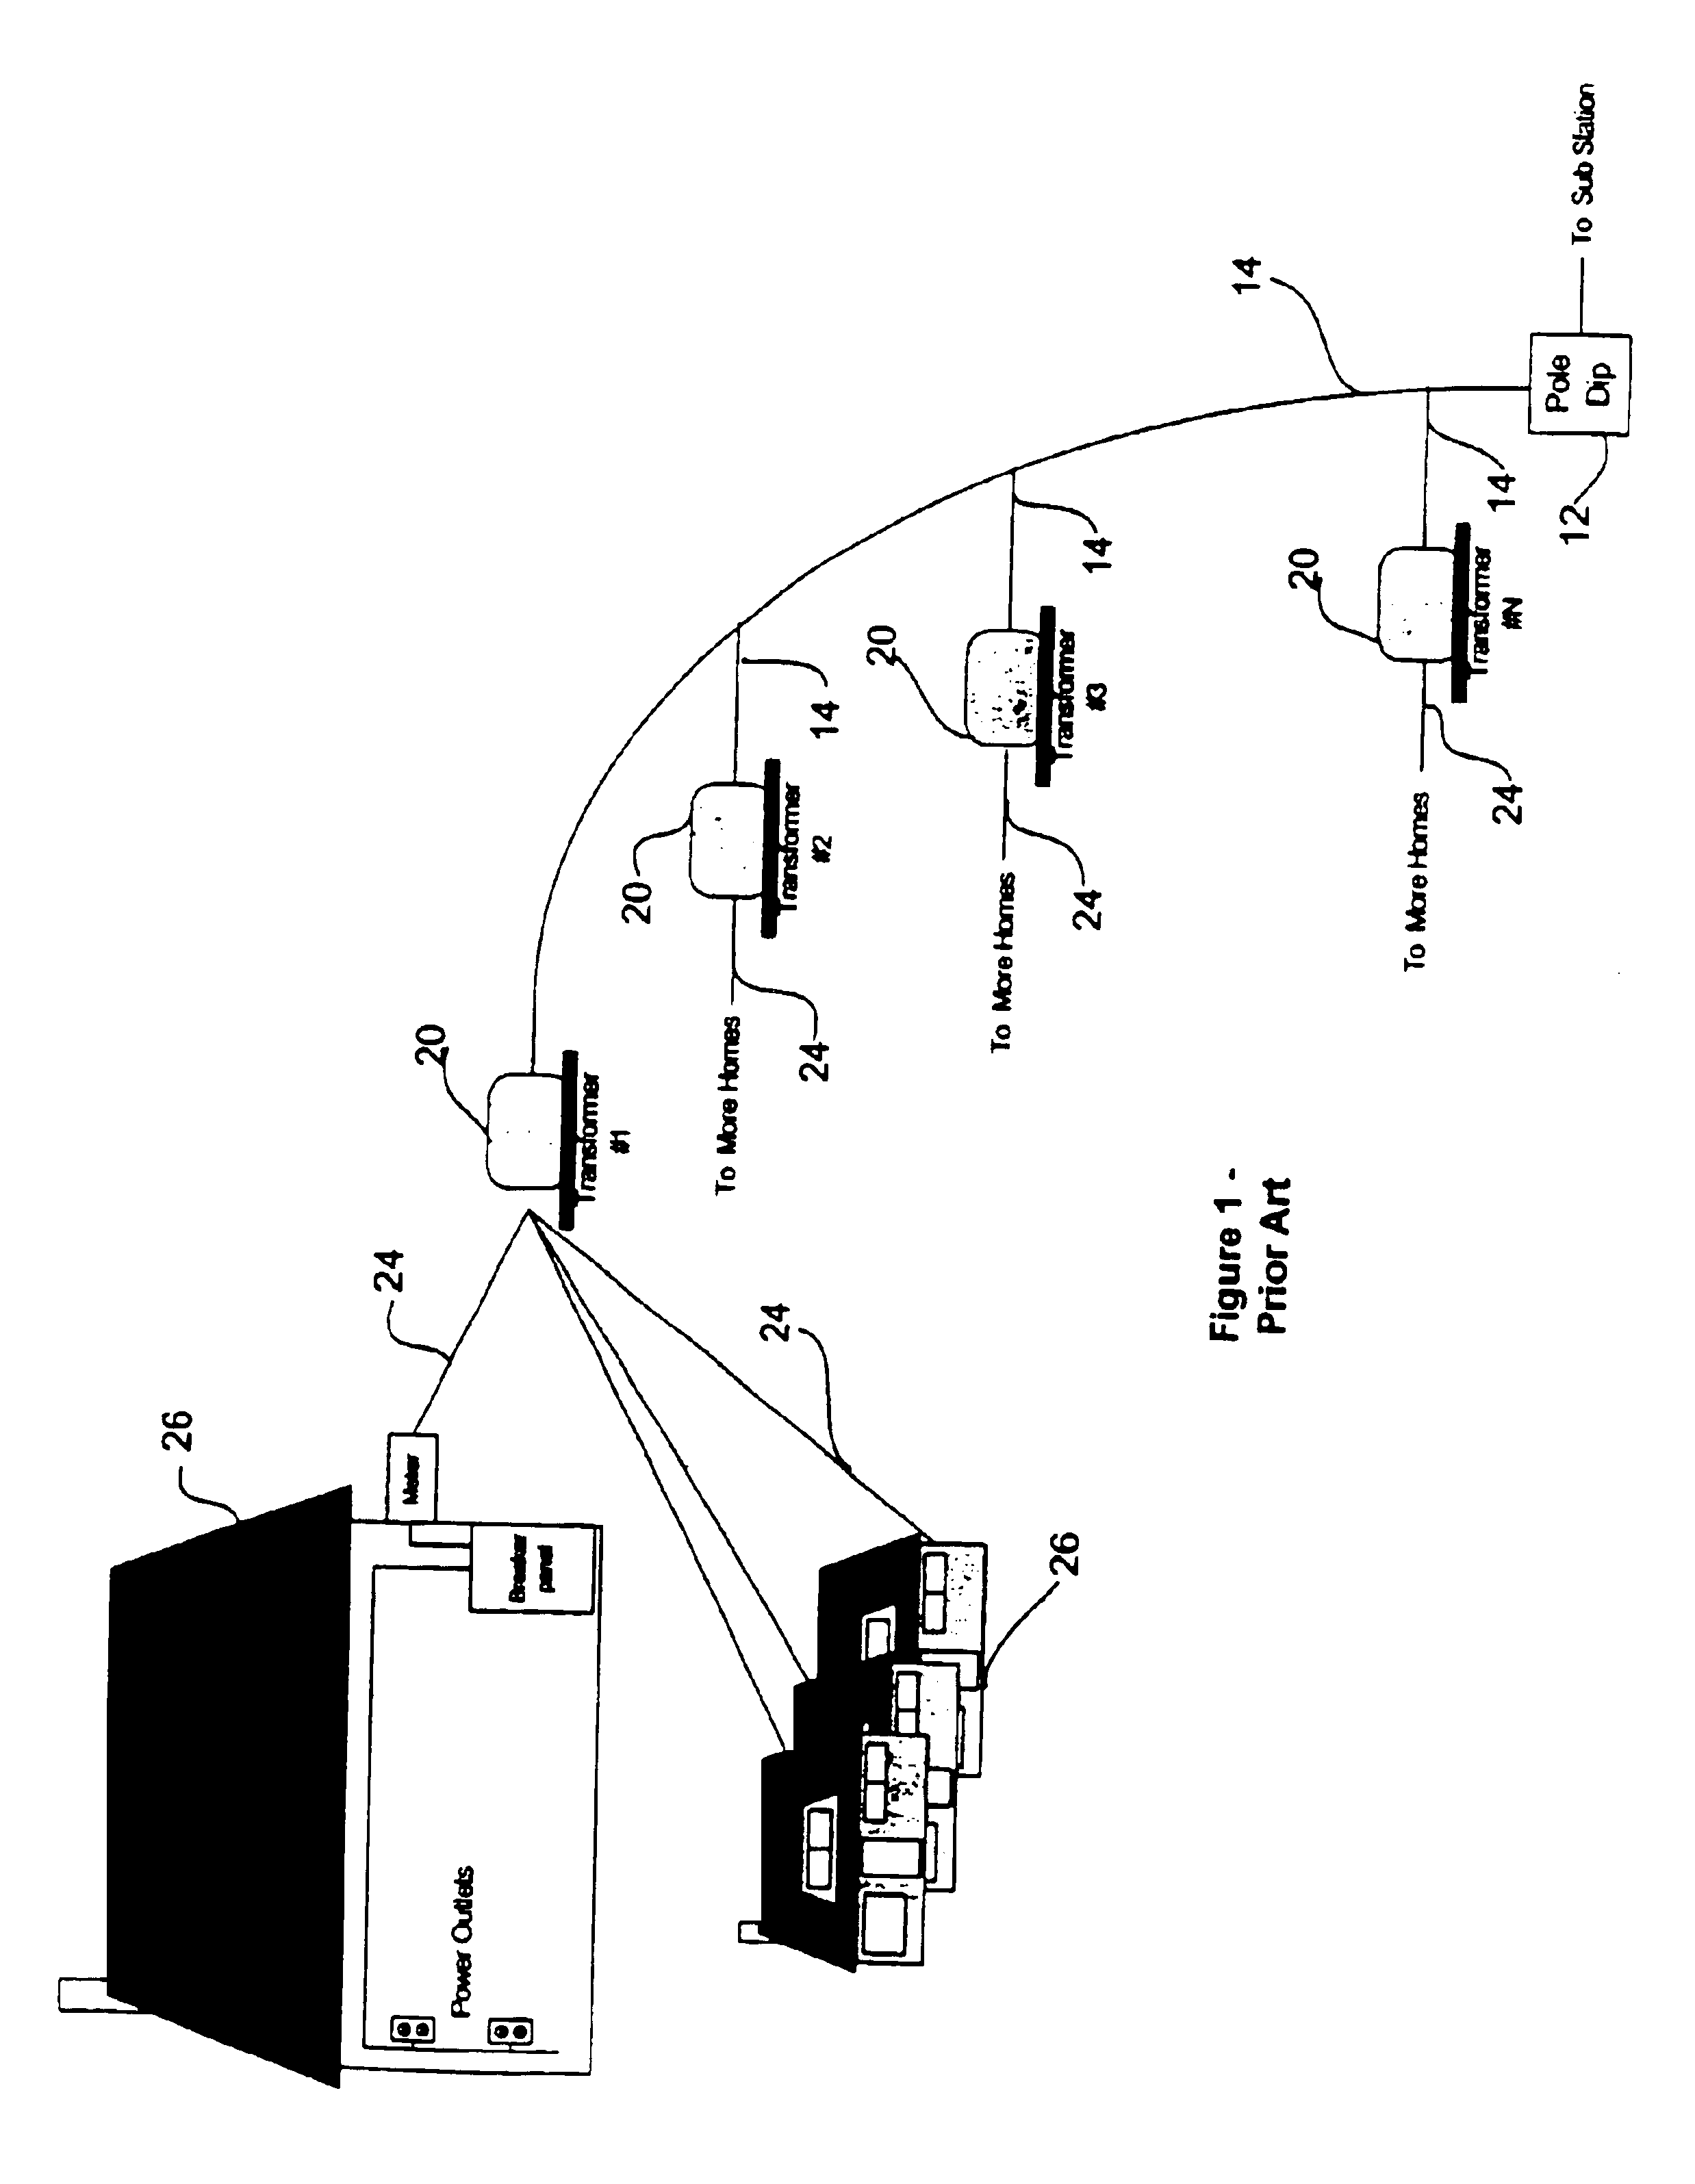 Method and apparatus for providing inductive coupling and decoupling of high-frequency, high-bandwidth data signals directly on and off of a high voltage power line